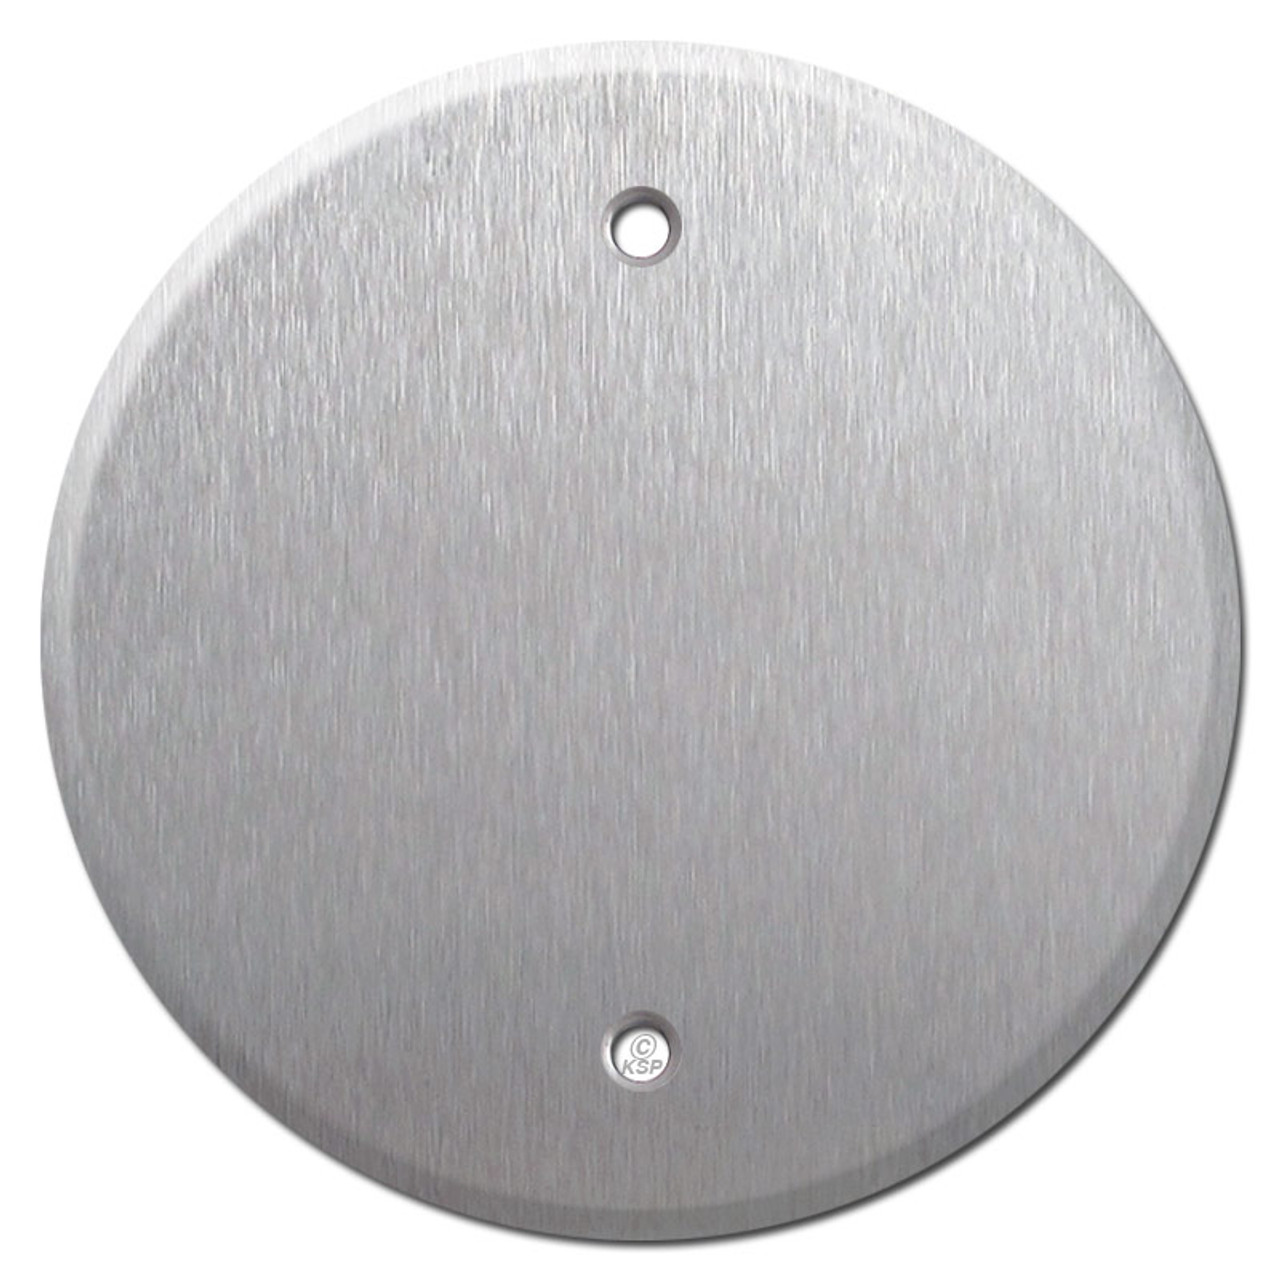 11 Round Stainless Steel Plate Covers